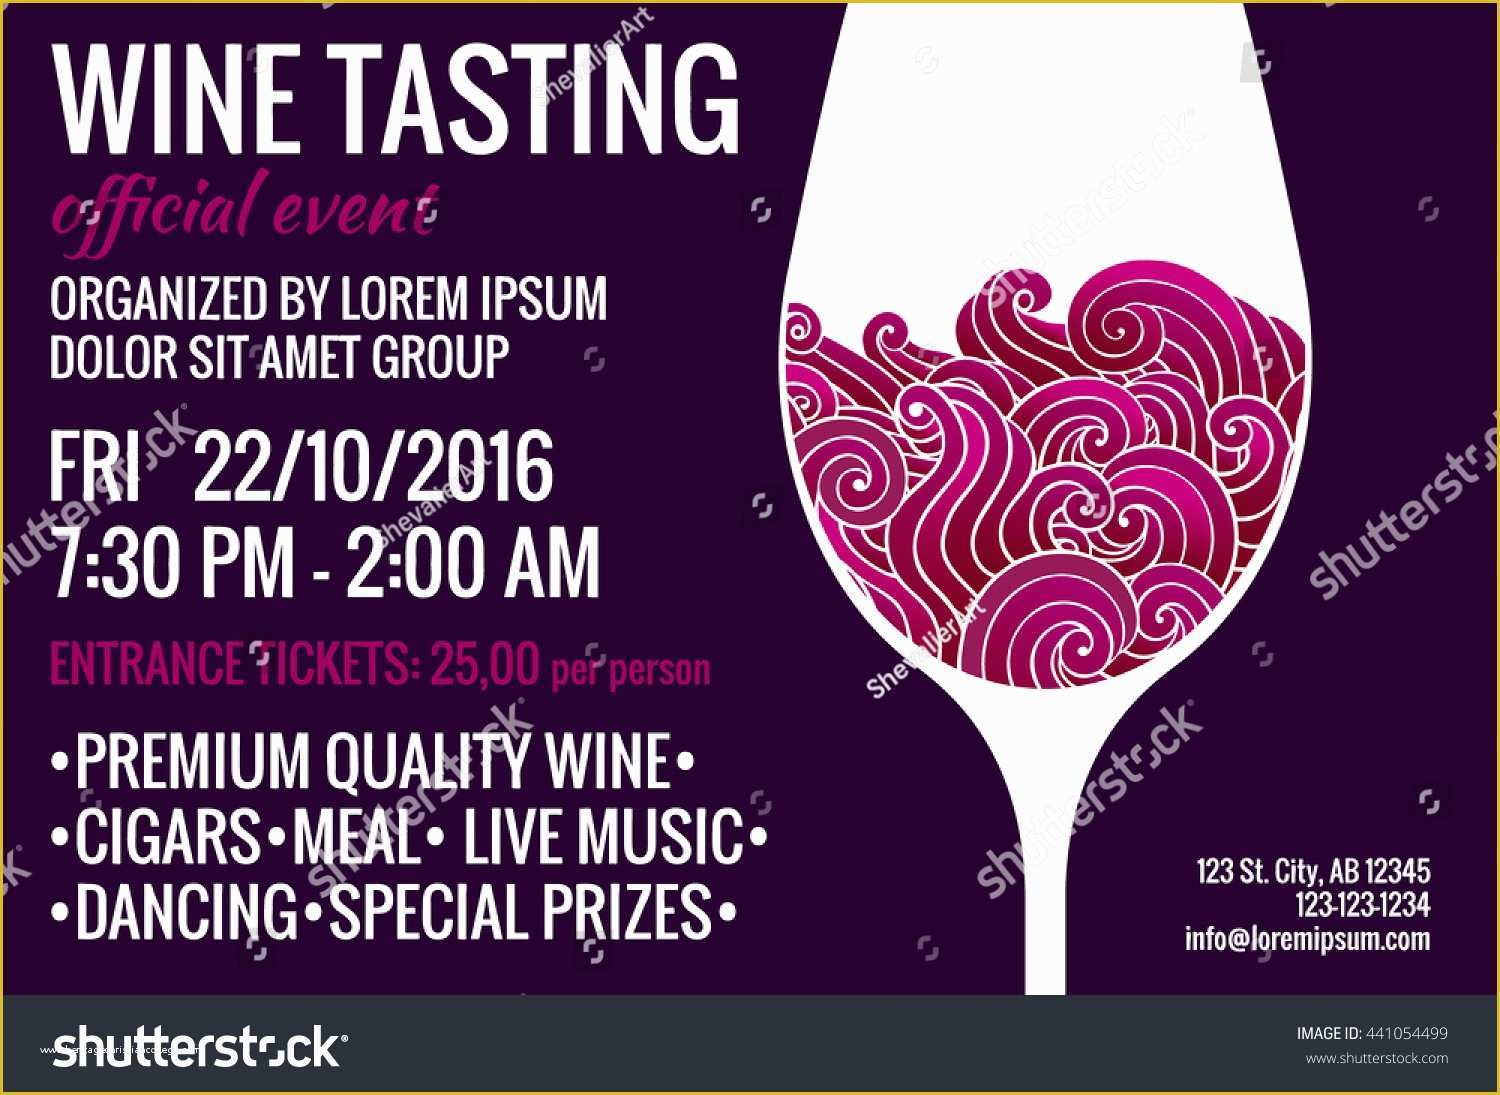 Wine Tasting event Flyer Template Free Of Wine Tasting Party Flyer Stylized Glass Stock Vector